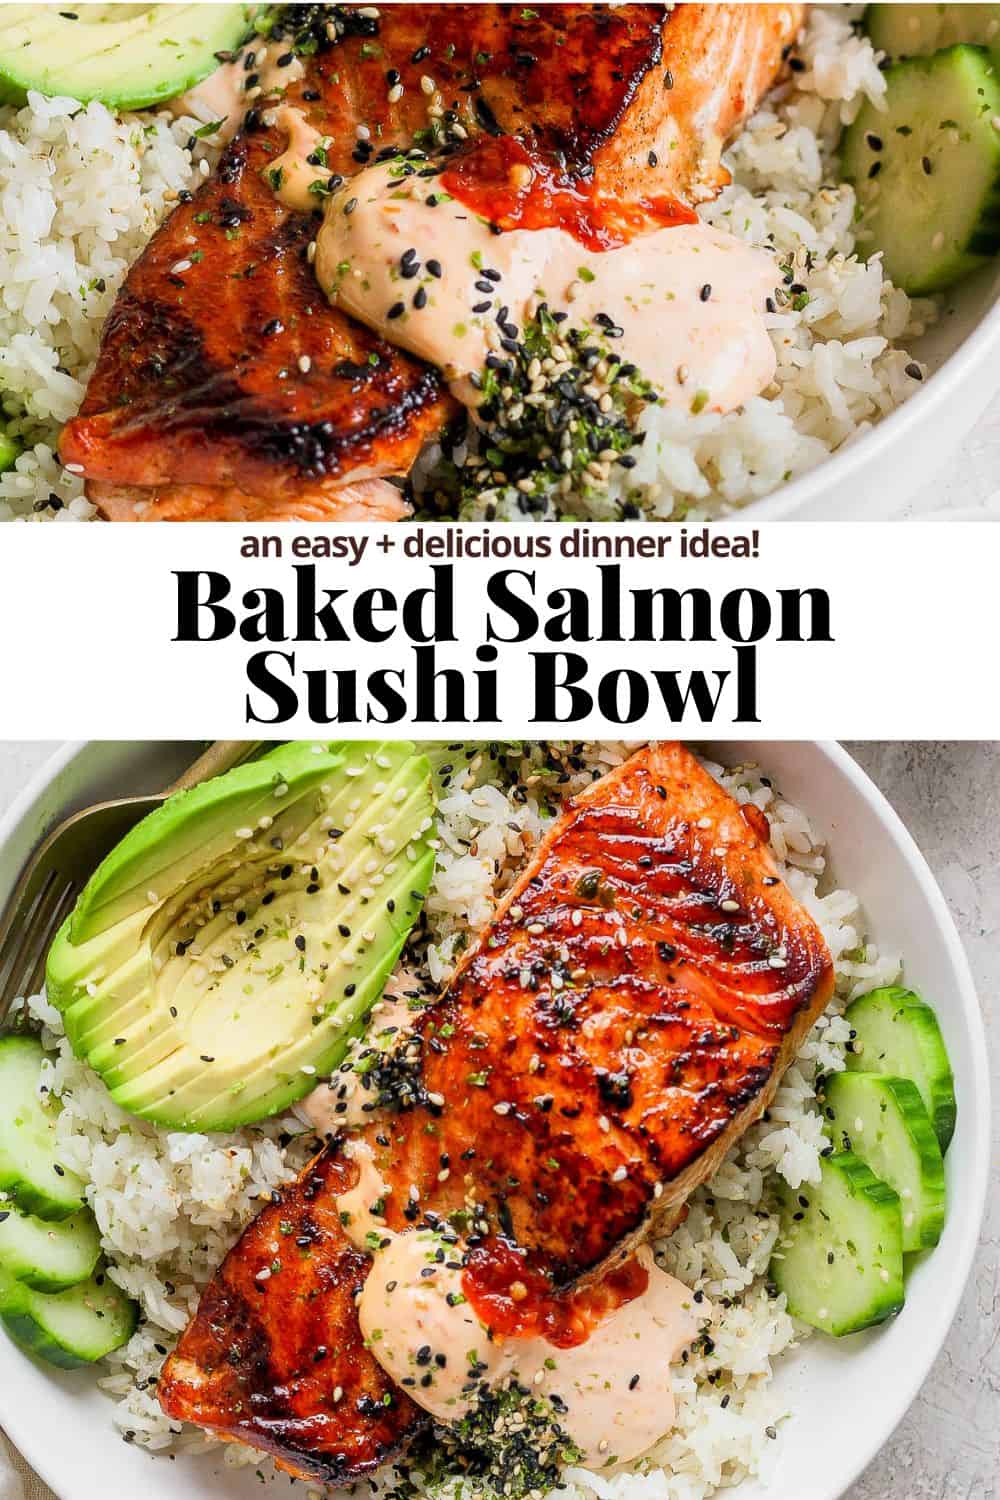 Pinterest image showing completed baked salmon sushi bowls with the title "baked salmon sushi bowl. an easy and delicious dinner idea!"